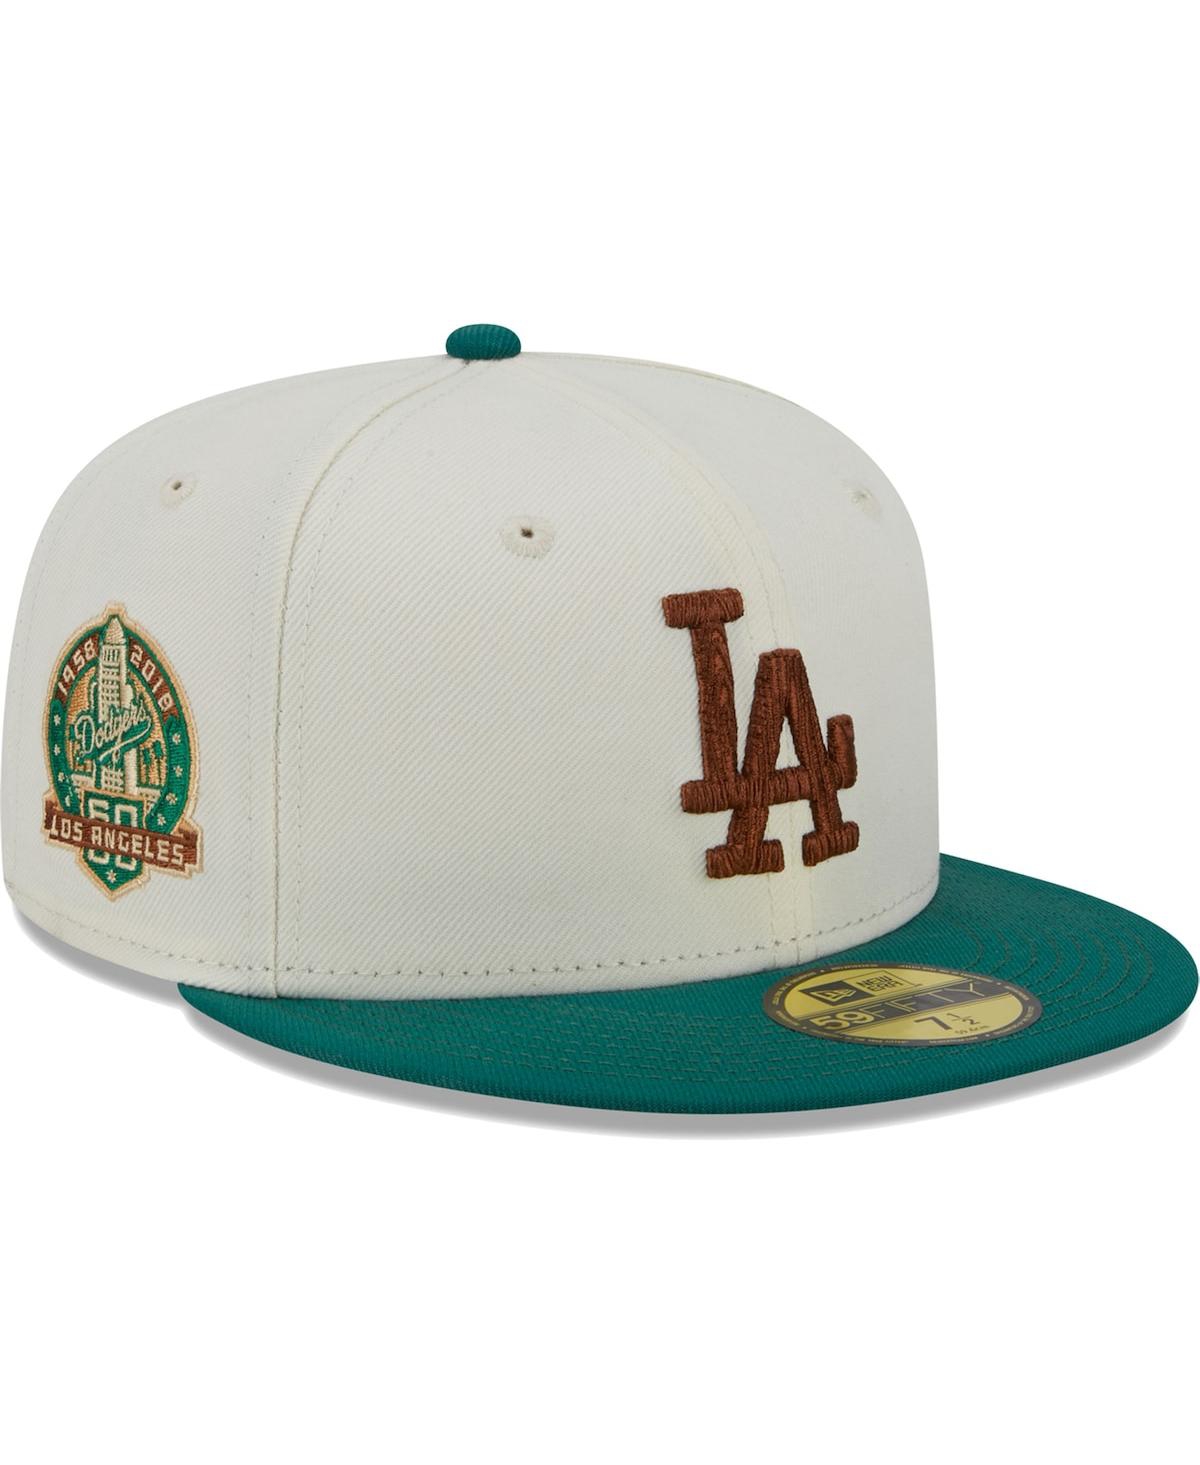 New Era Men's  White Los Angeles Dodgers Cooperstown Collection Camp 59fifty Fitted Hat